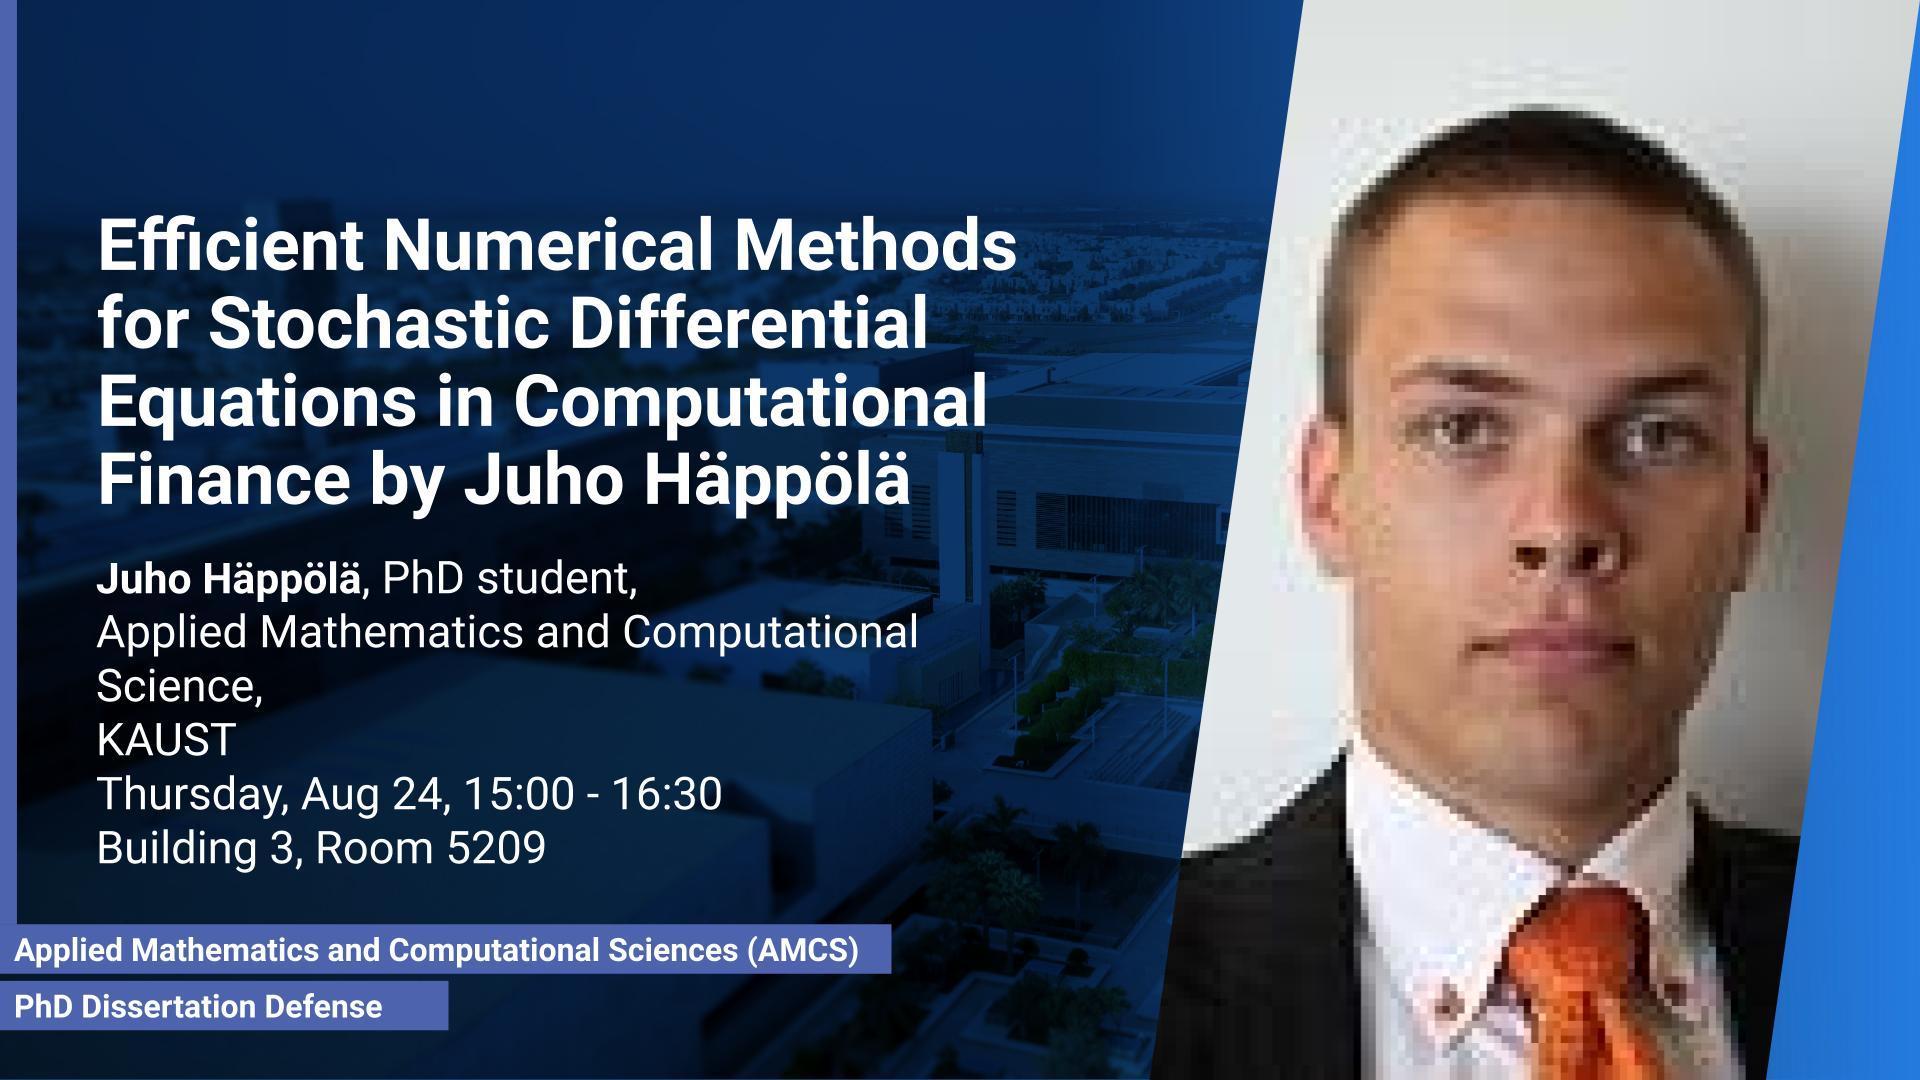 KAUST CEMSE AMCS STOCHNUM PhD Dissertation Defense Juho Häppölä Efficient Numerical Methods for Stochastic Differential Equations